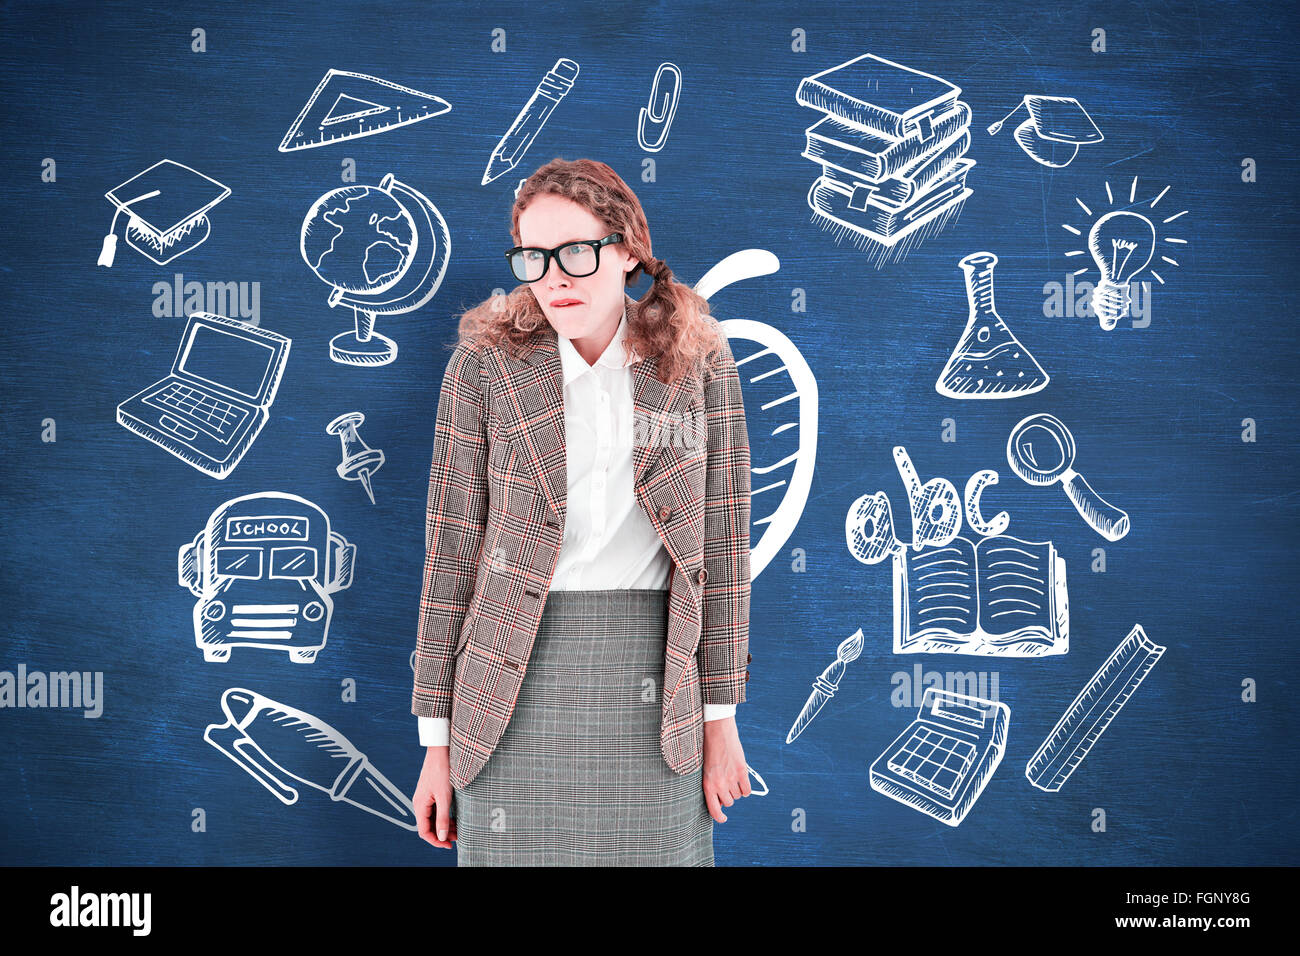 Composite image of geeky hipster woman looking nervous Stock Photo